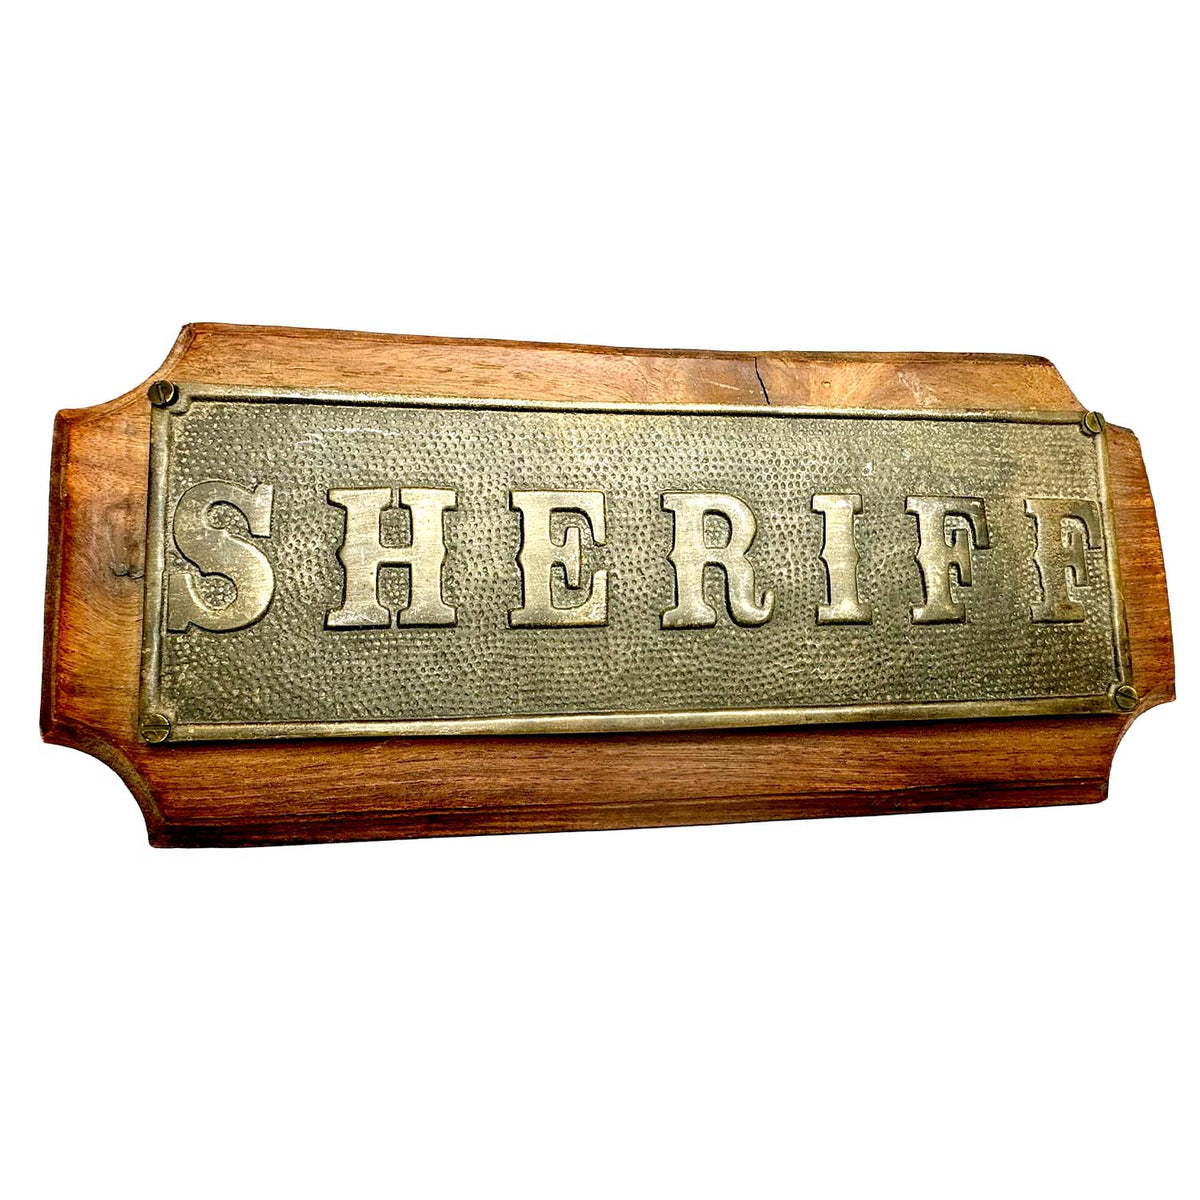 Western Rustic Wooden Sheriff Plaque